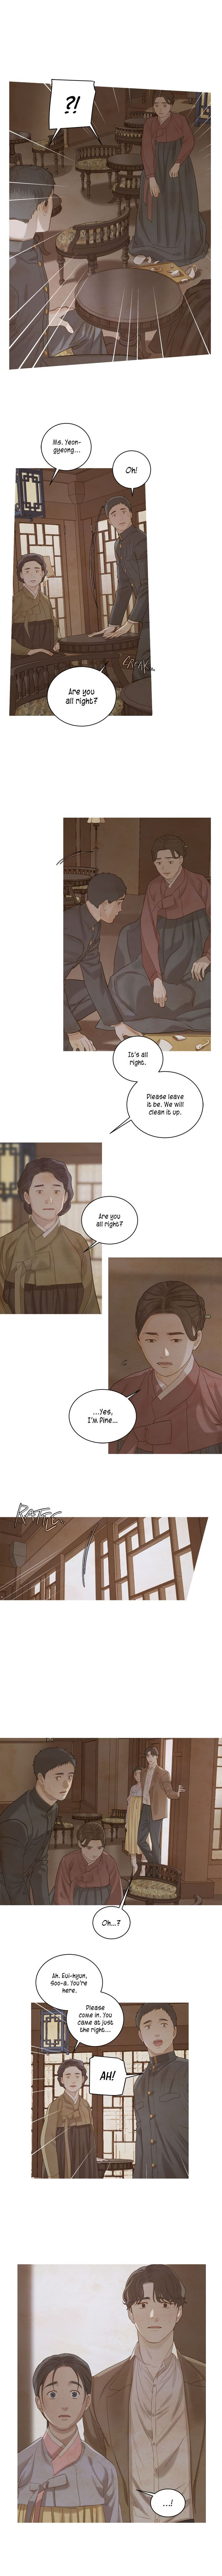 Gorae Byul - The Gyeongseong Mermaid - Chapter 29 Page 4